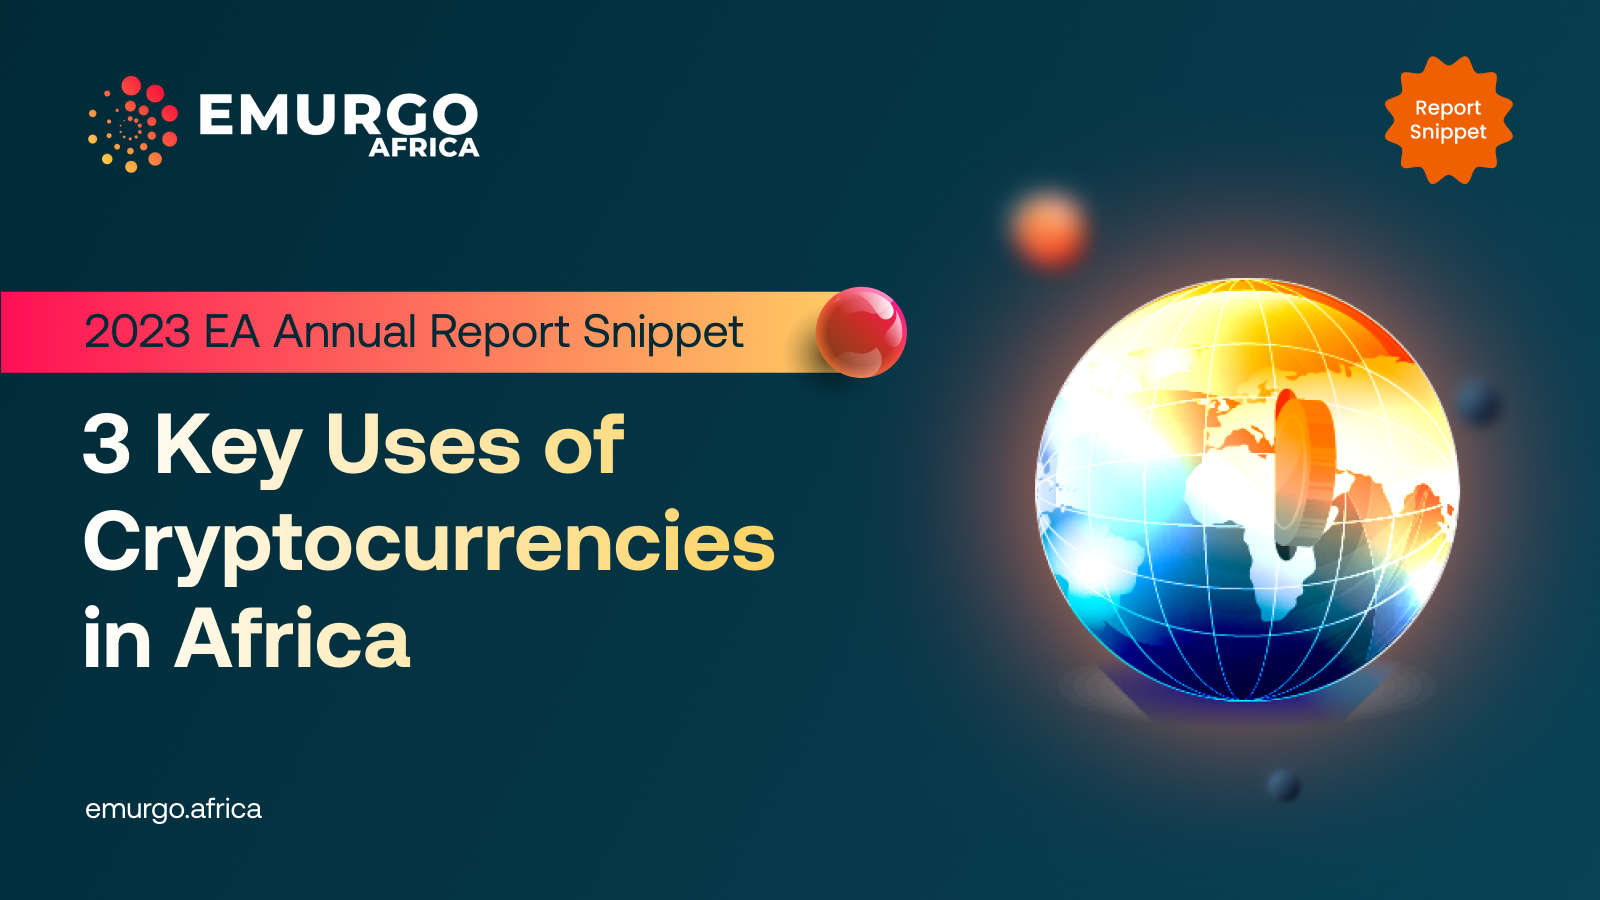 3 Key Uses of Cryptocurrencies in Africa